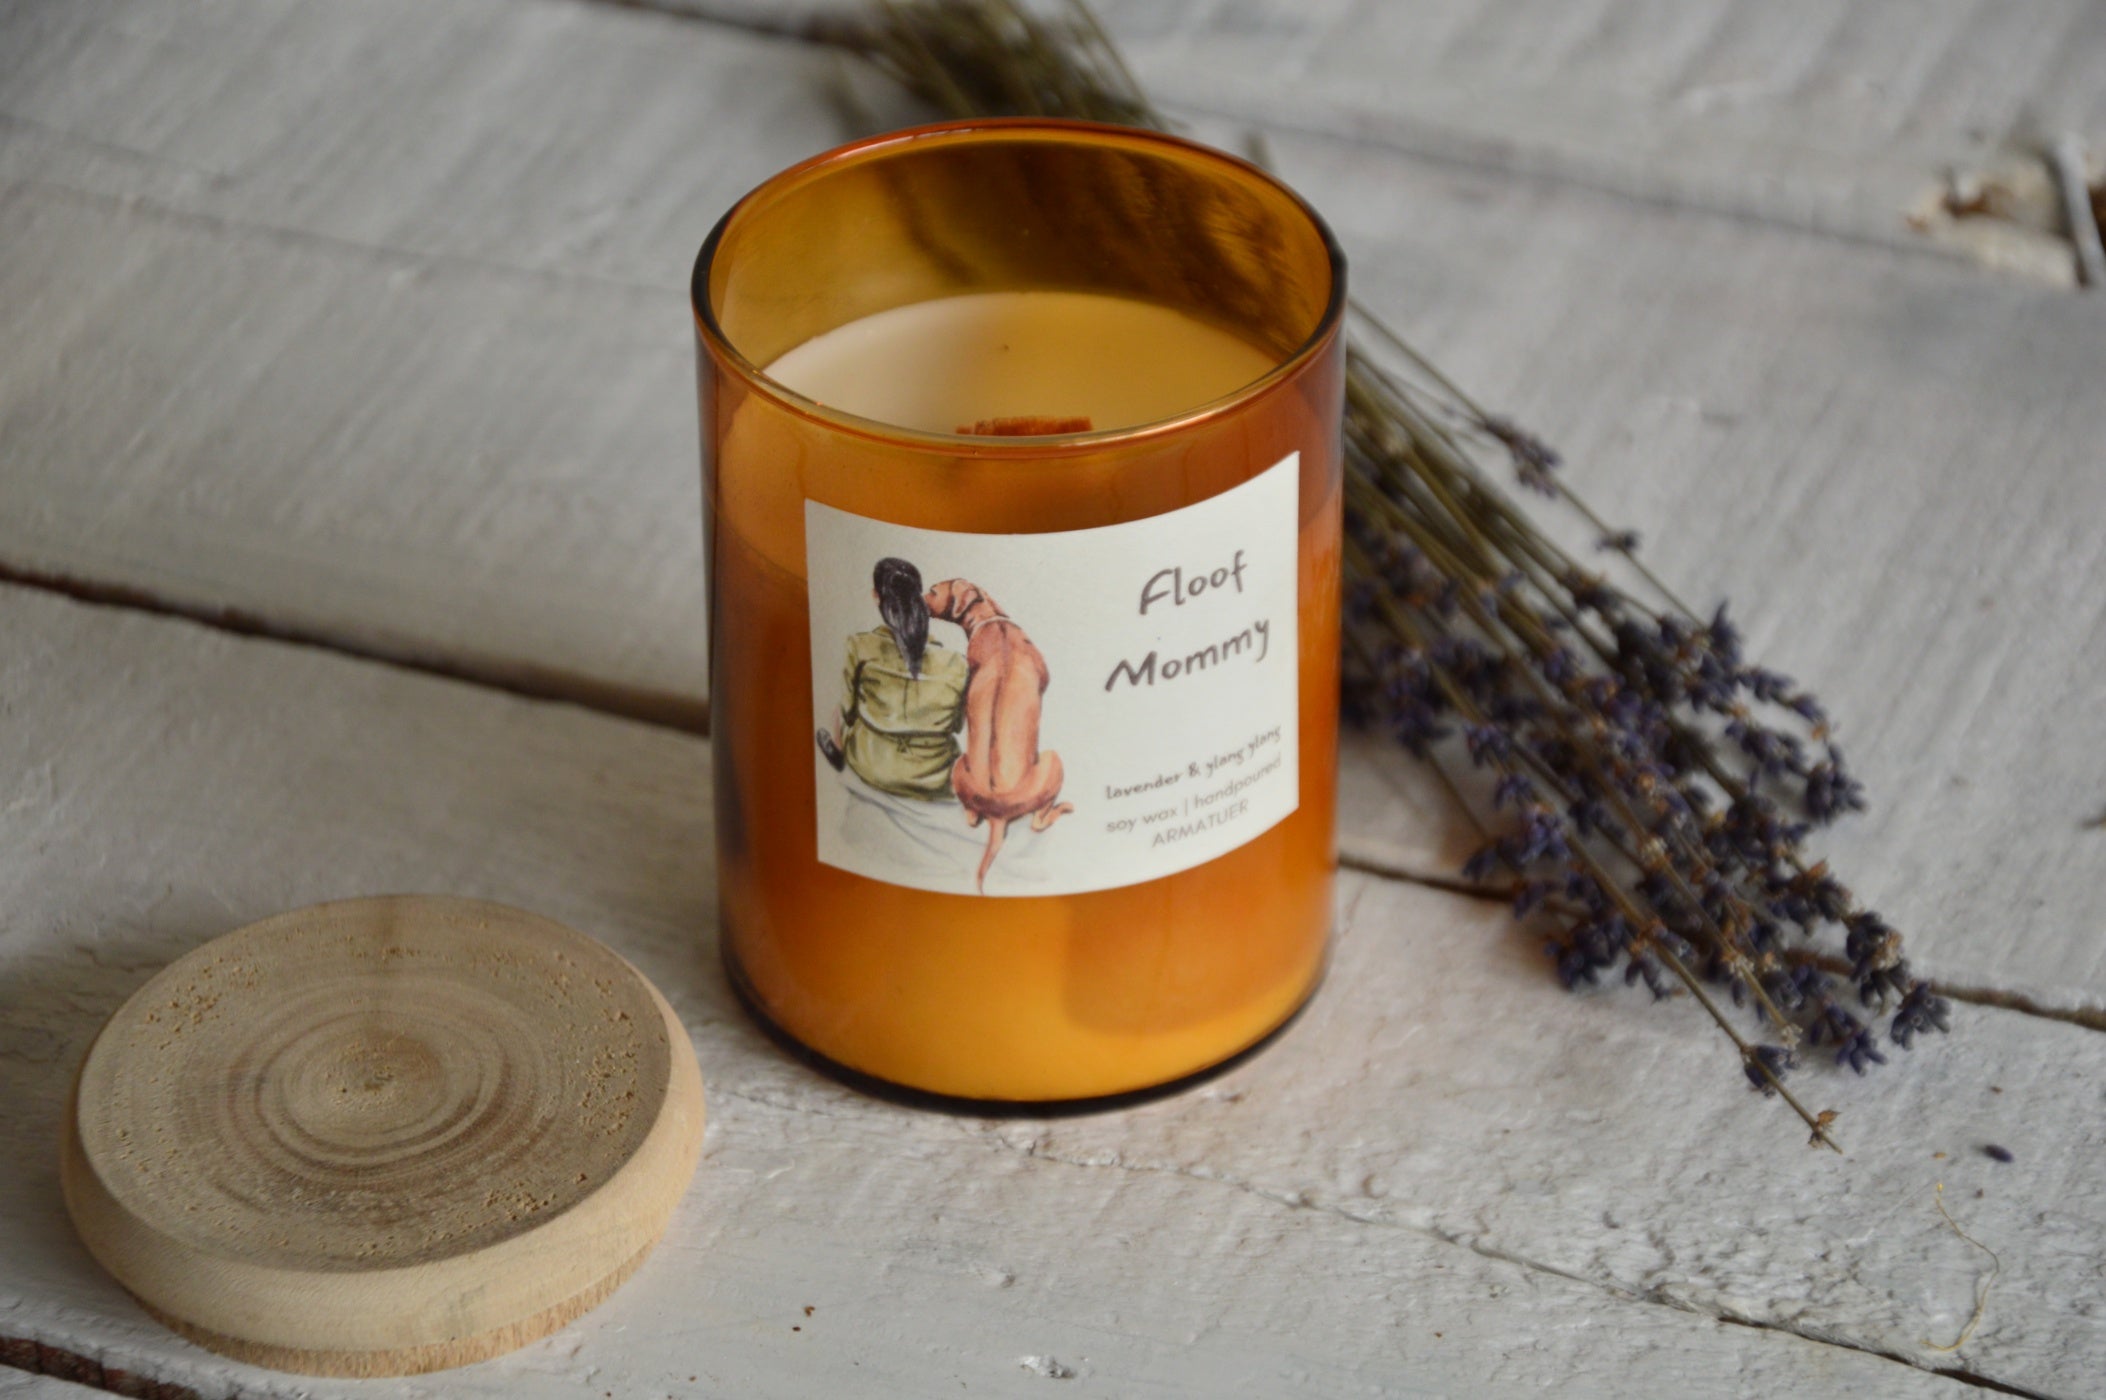 Floof Mommy Woodwick Candle